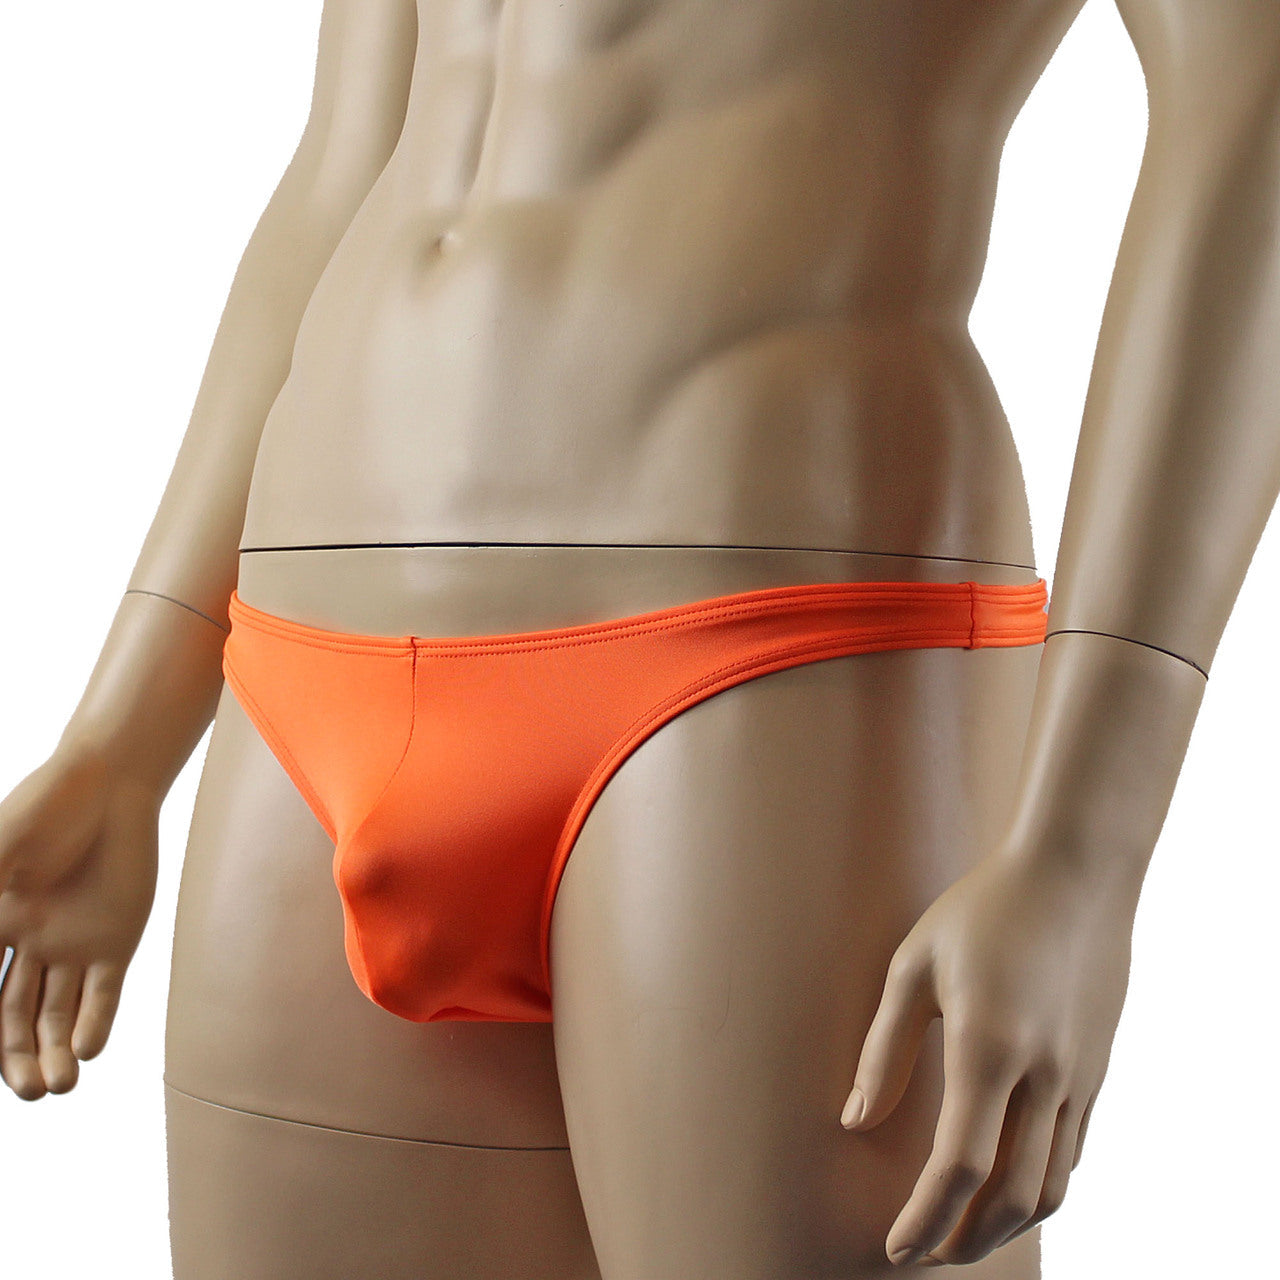 Mens Thong Underwear Wide Front or Narrow Front (orange plus other colours)